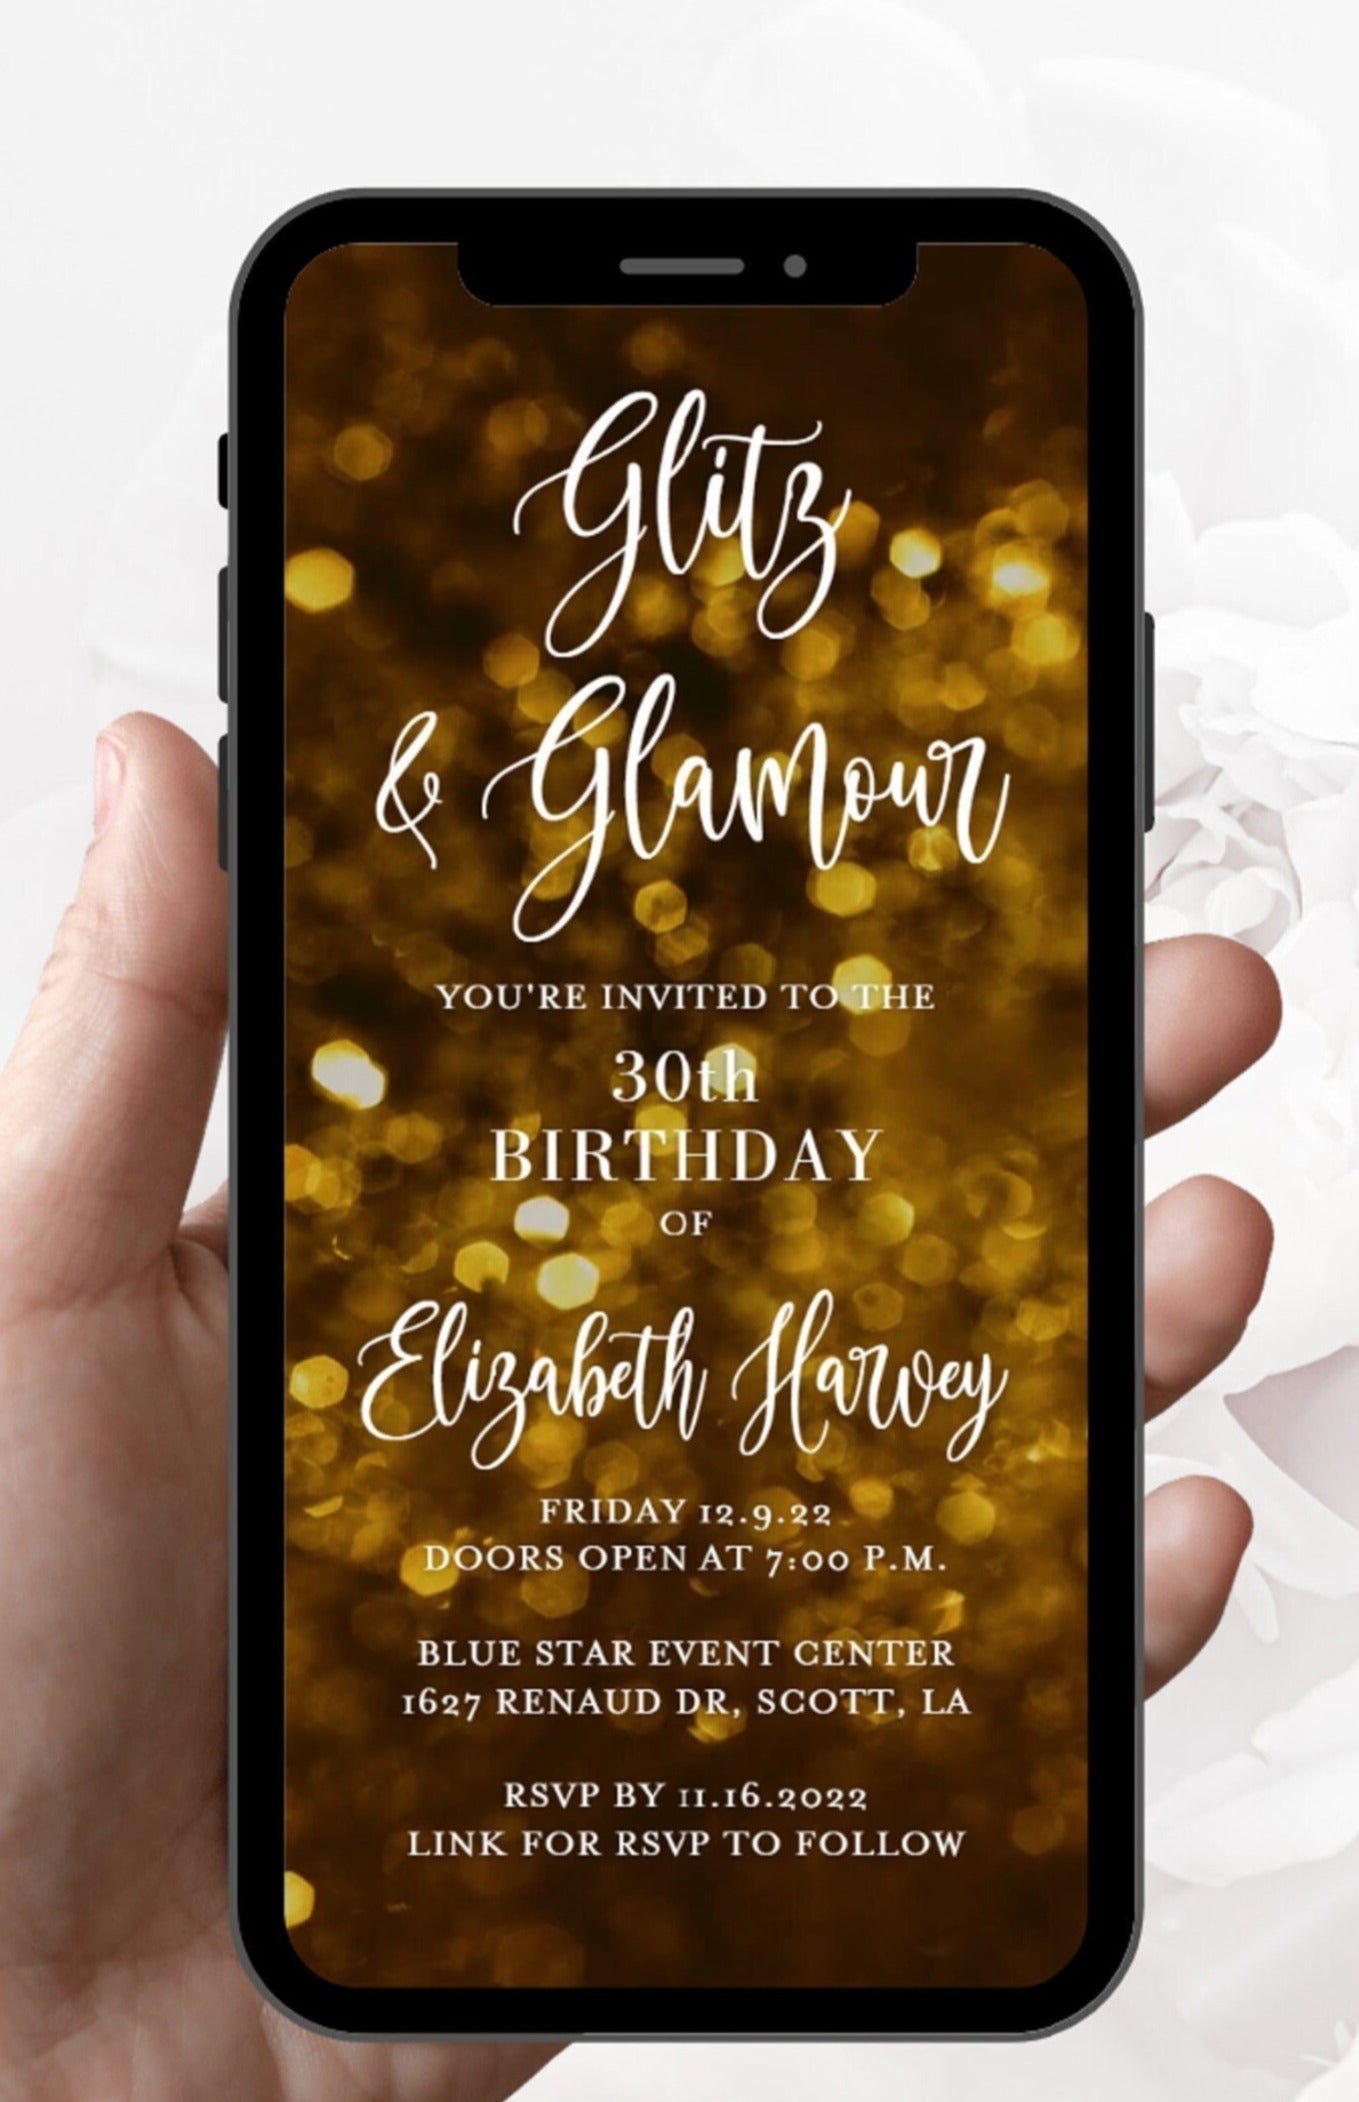 Glamour Electronic Wedding Invitation edit in canva, Wedding Mobile Invite, Digital Engagement Party Video Invitations, Instant Download  SAVVY PAPER CO